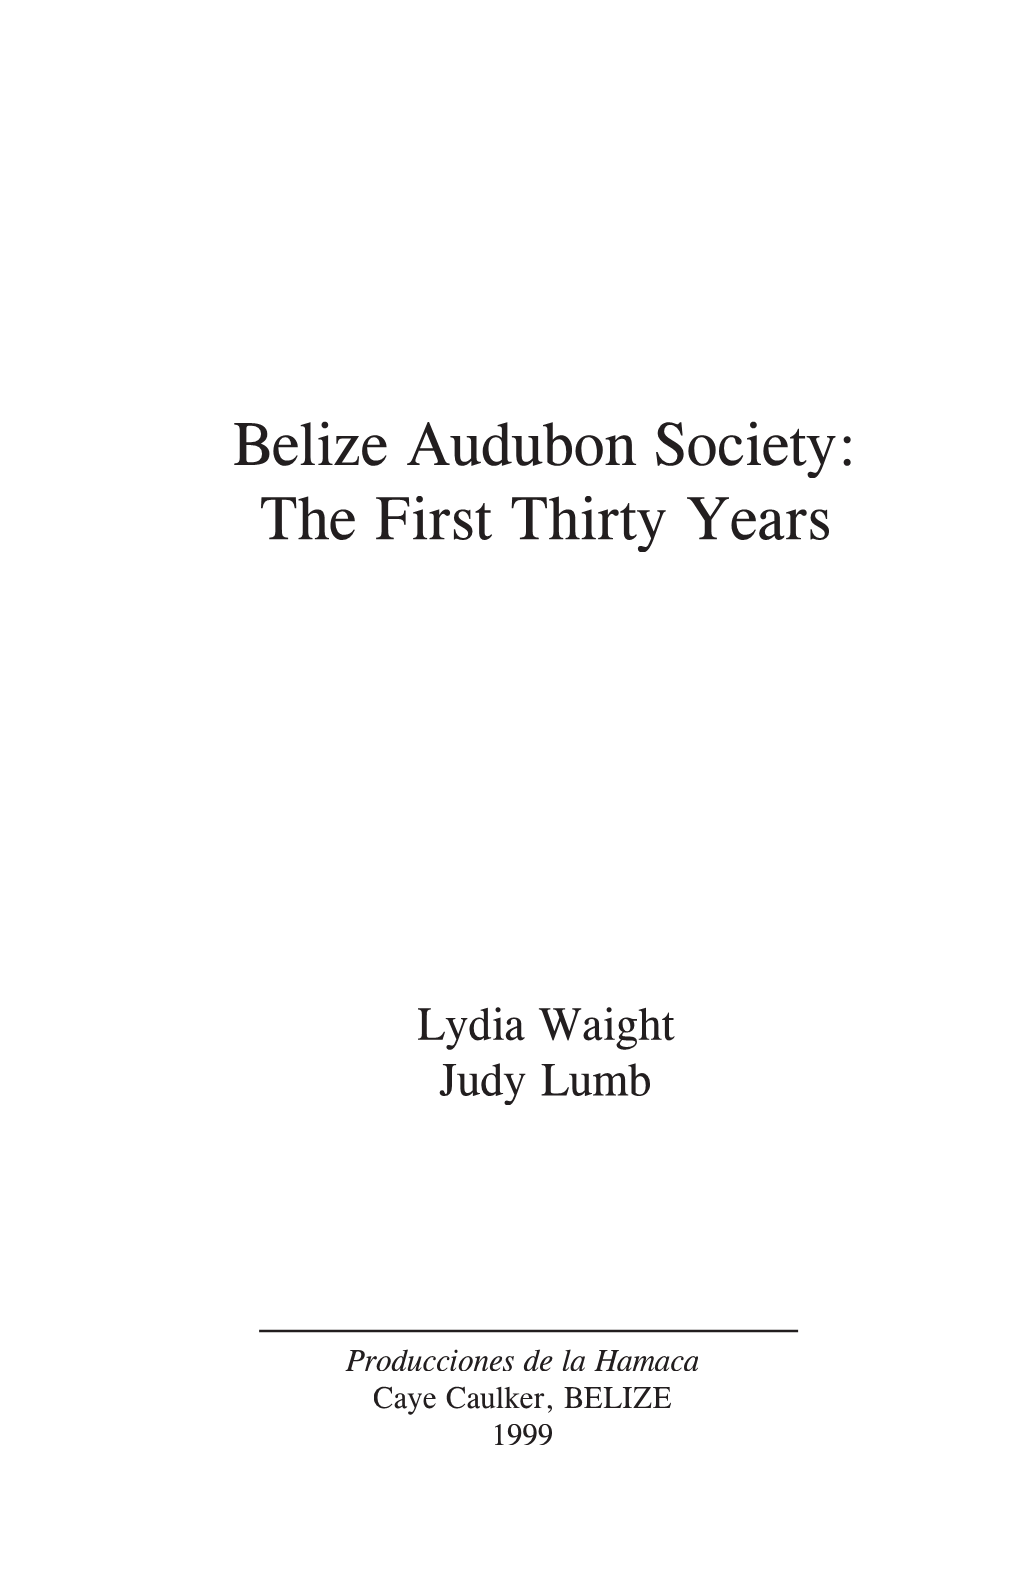 Belize Audubon Society: the First Thirty Years